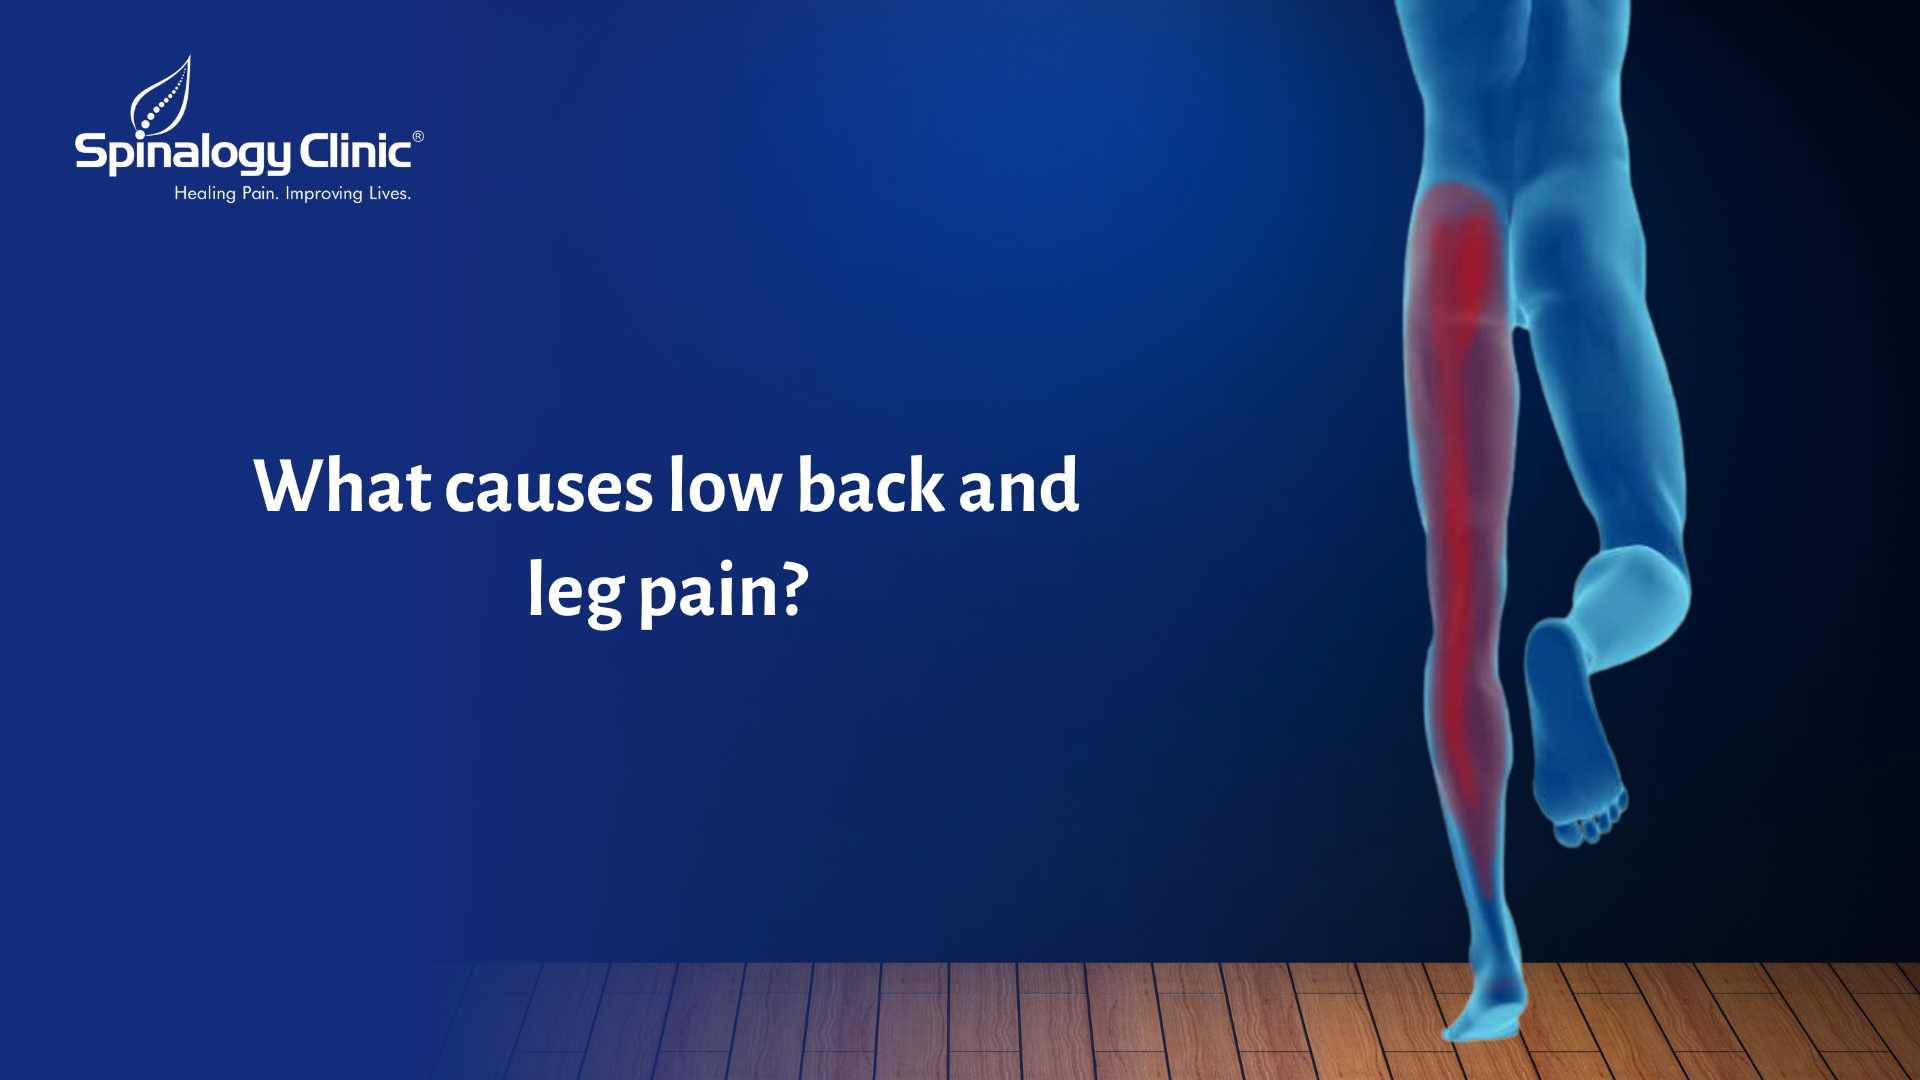 What Causes Low Back and Leg Pain?